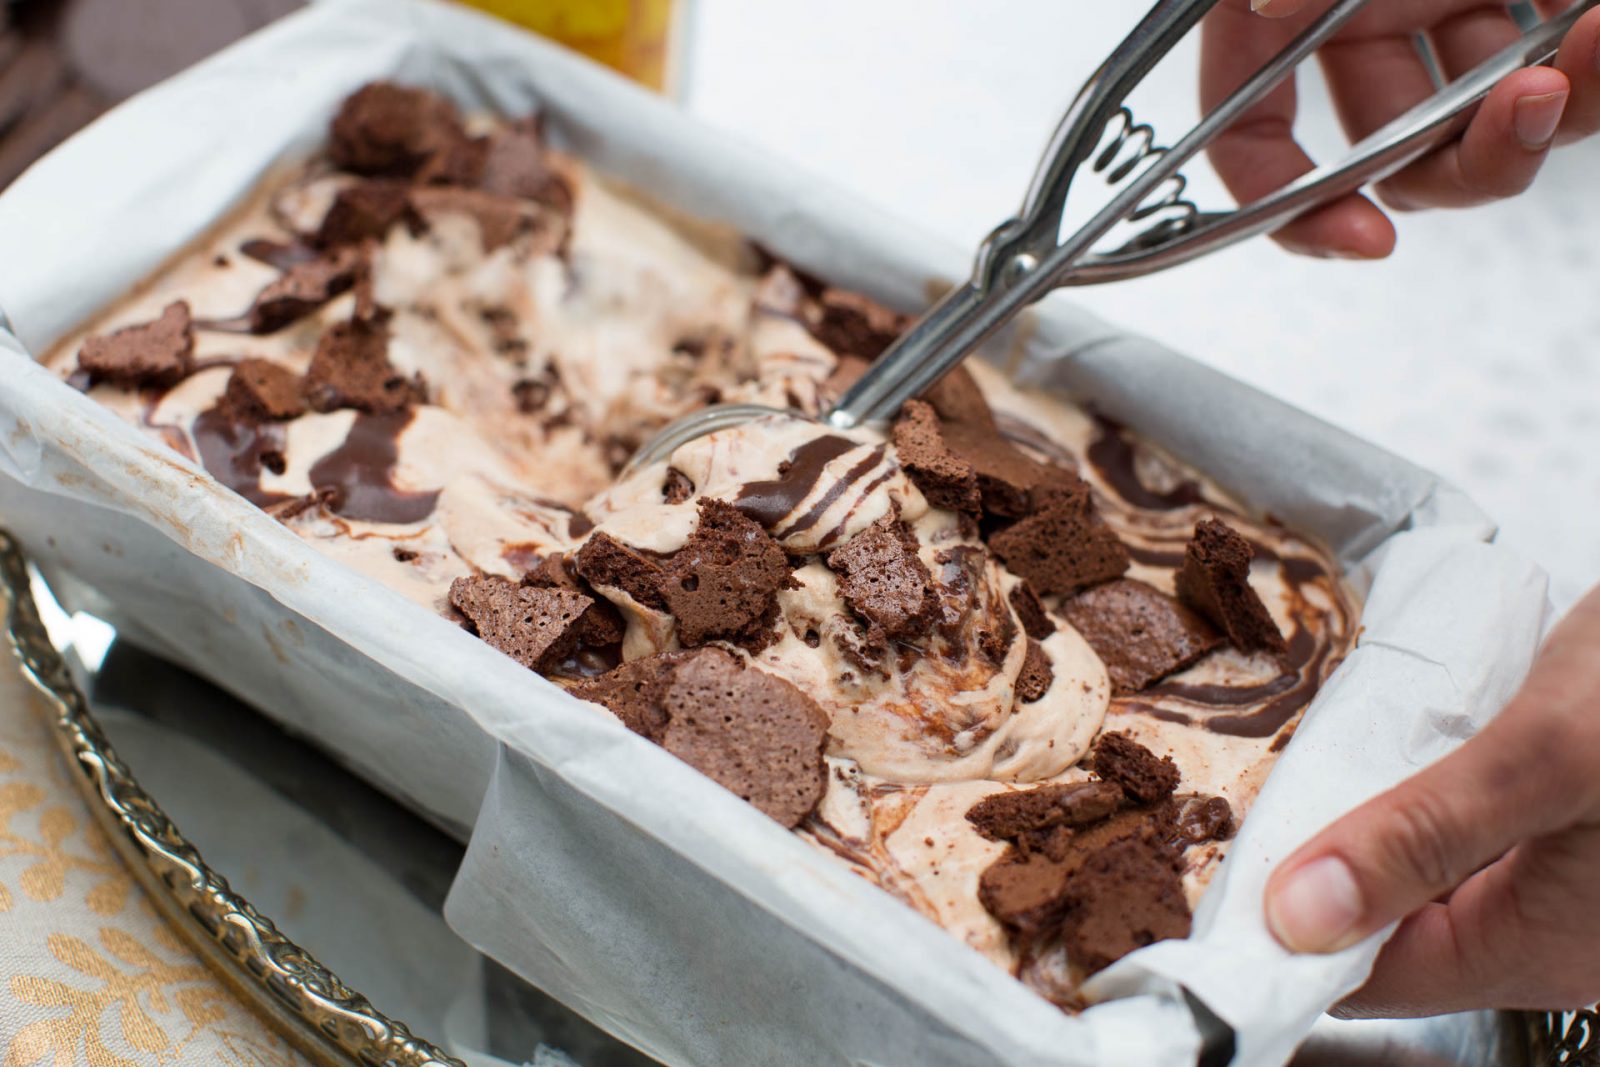 🍨 Create Your Own Ice Cream Flavor and We’ll Reveal What People Find Most Attractive About You chunks in ice cream